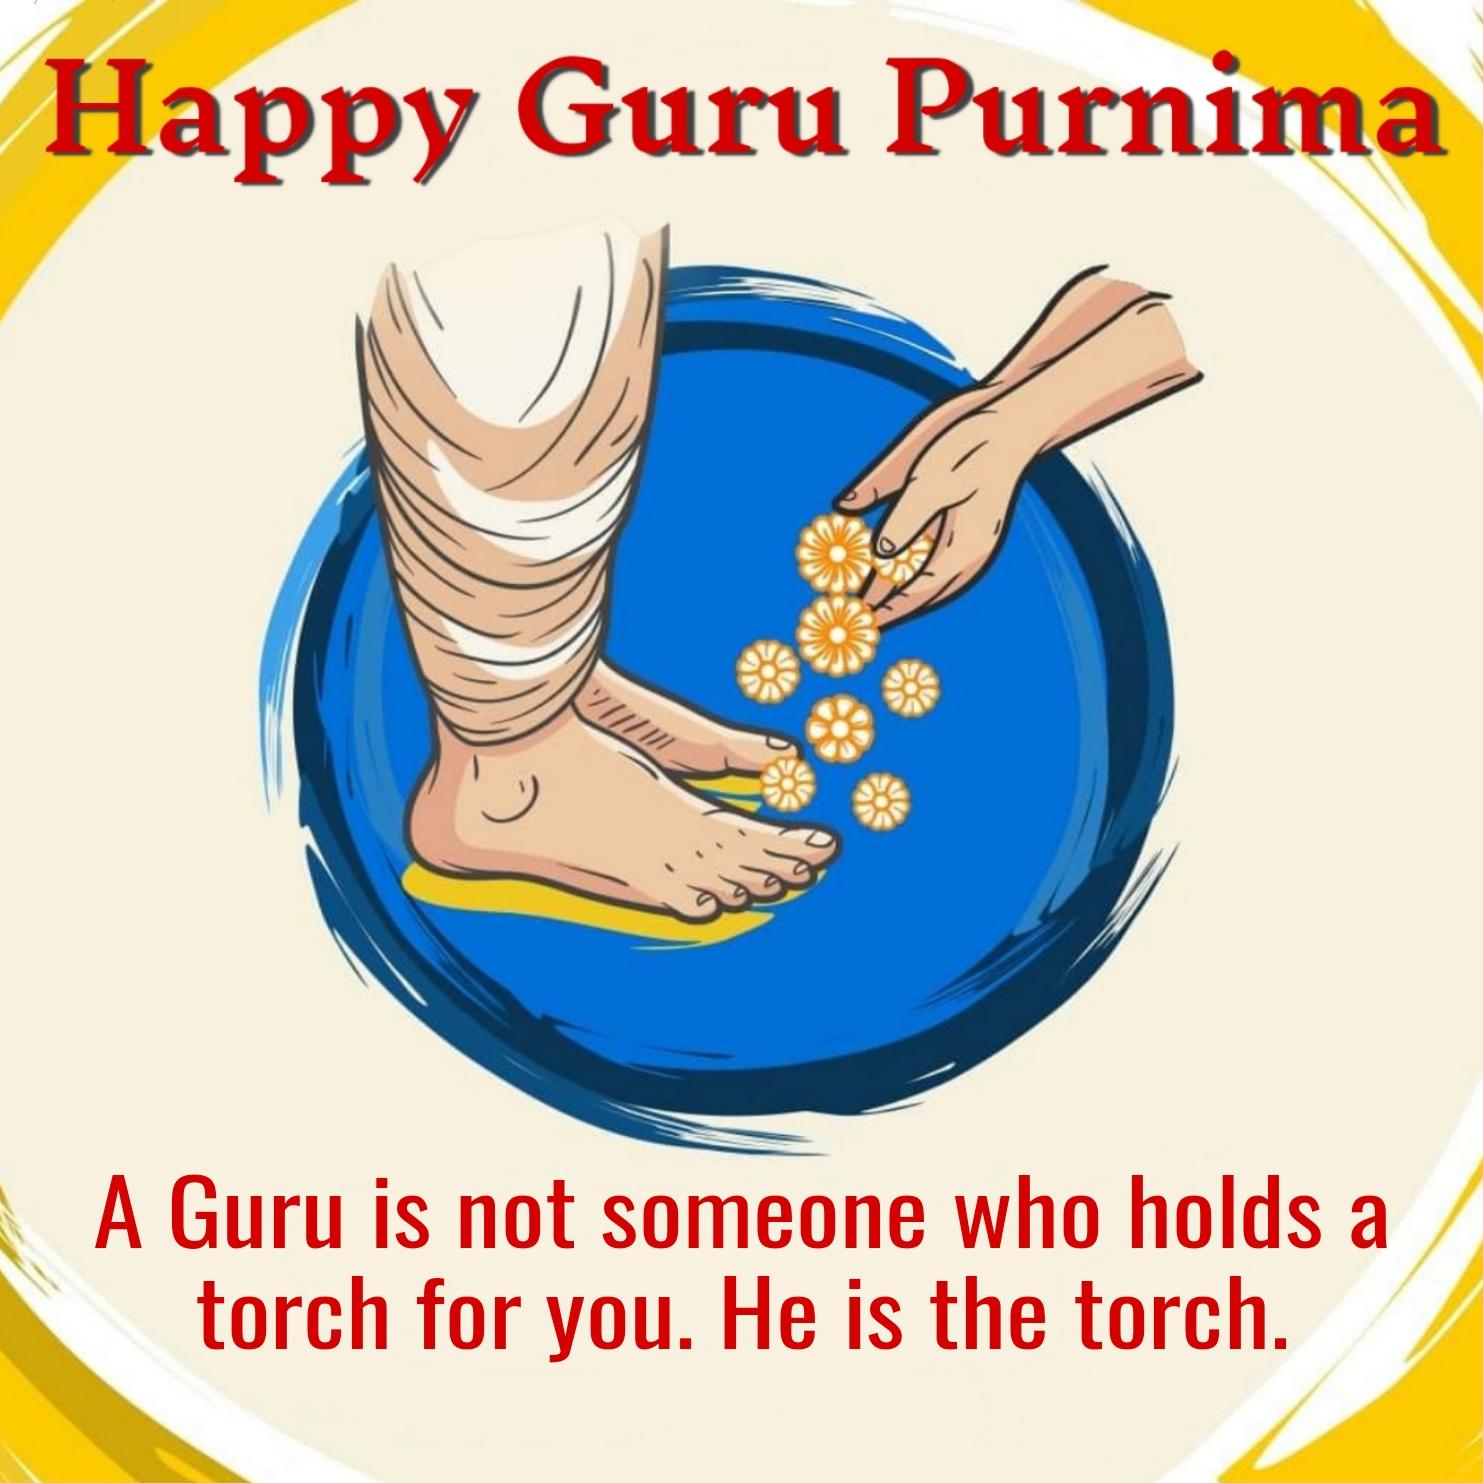 A Guru is not someone who holds a torch for you